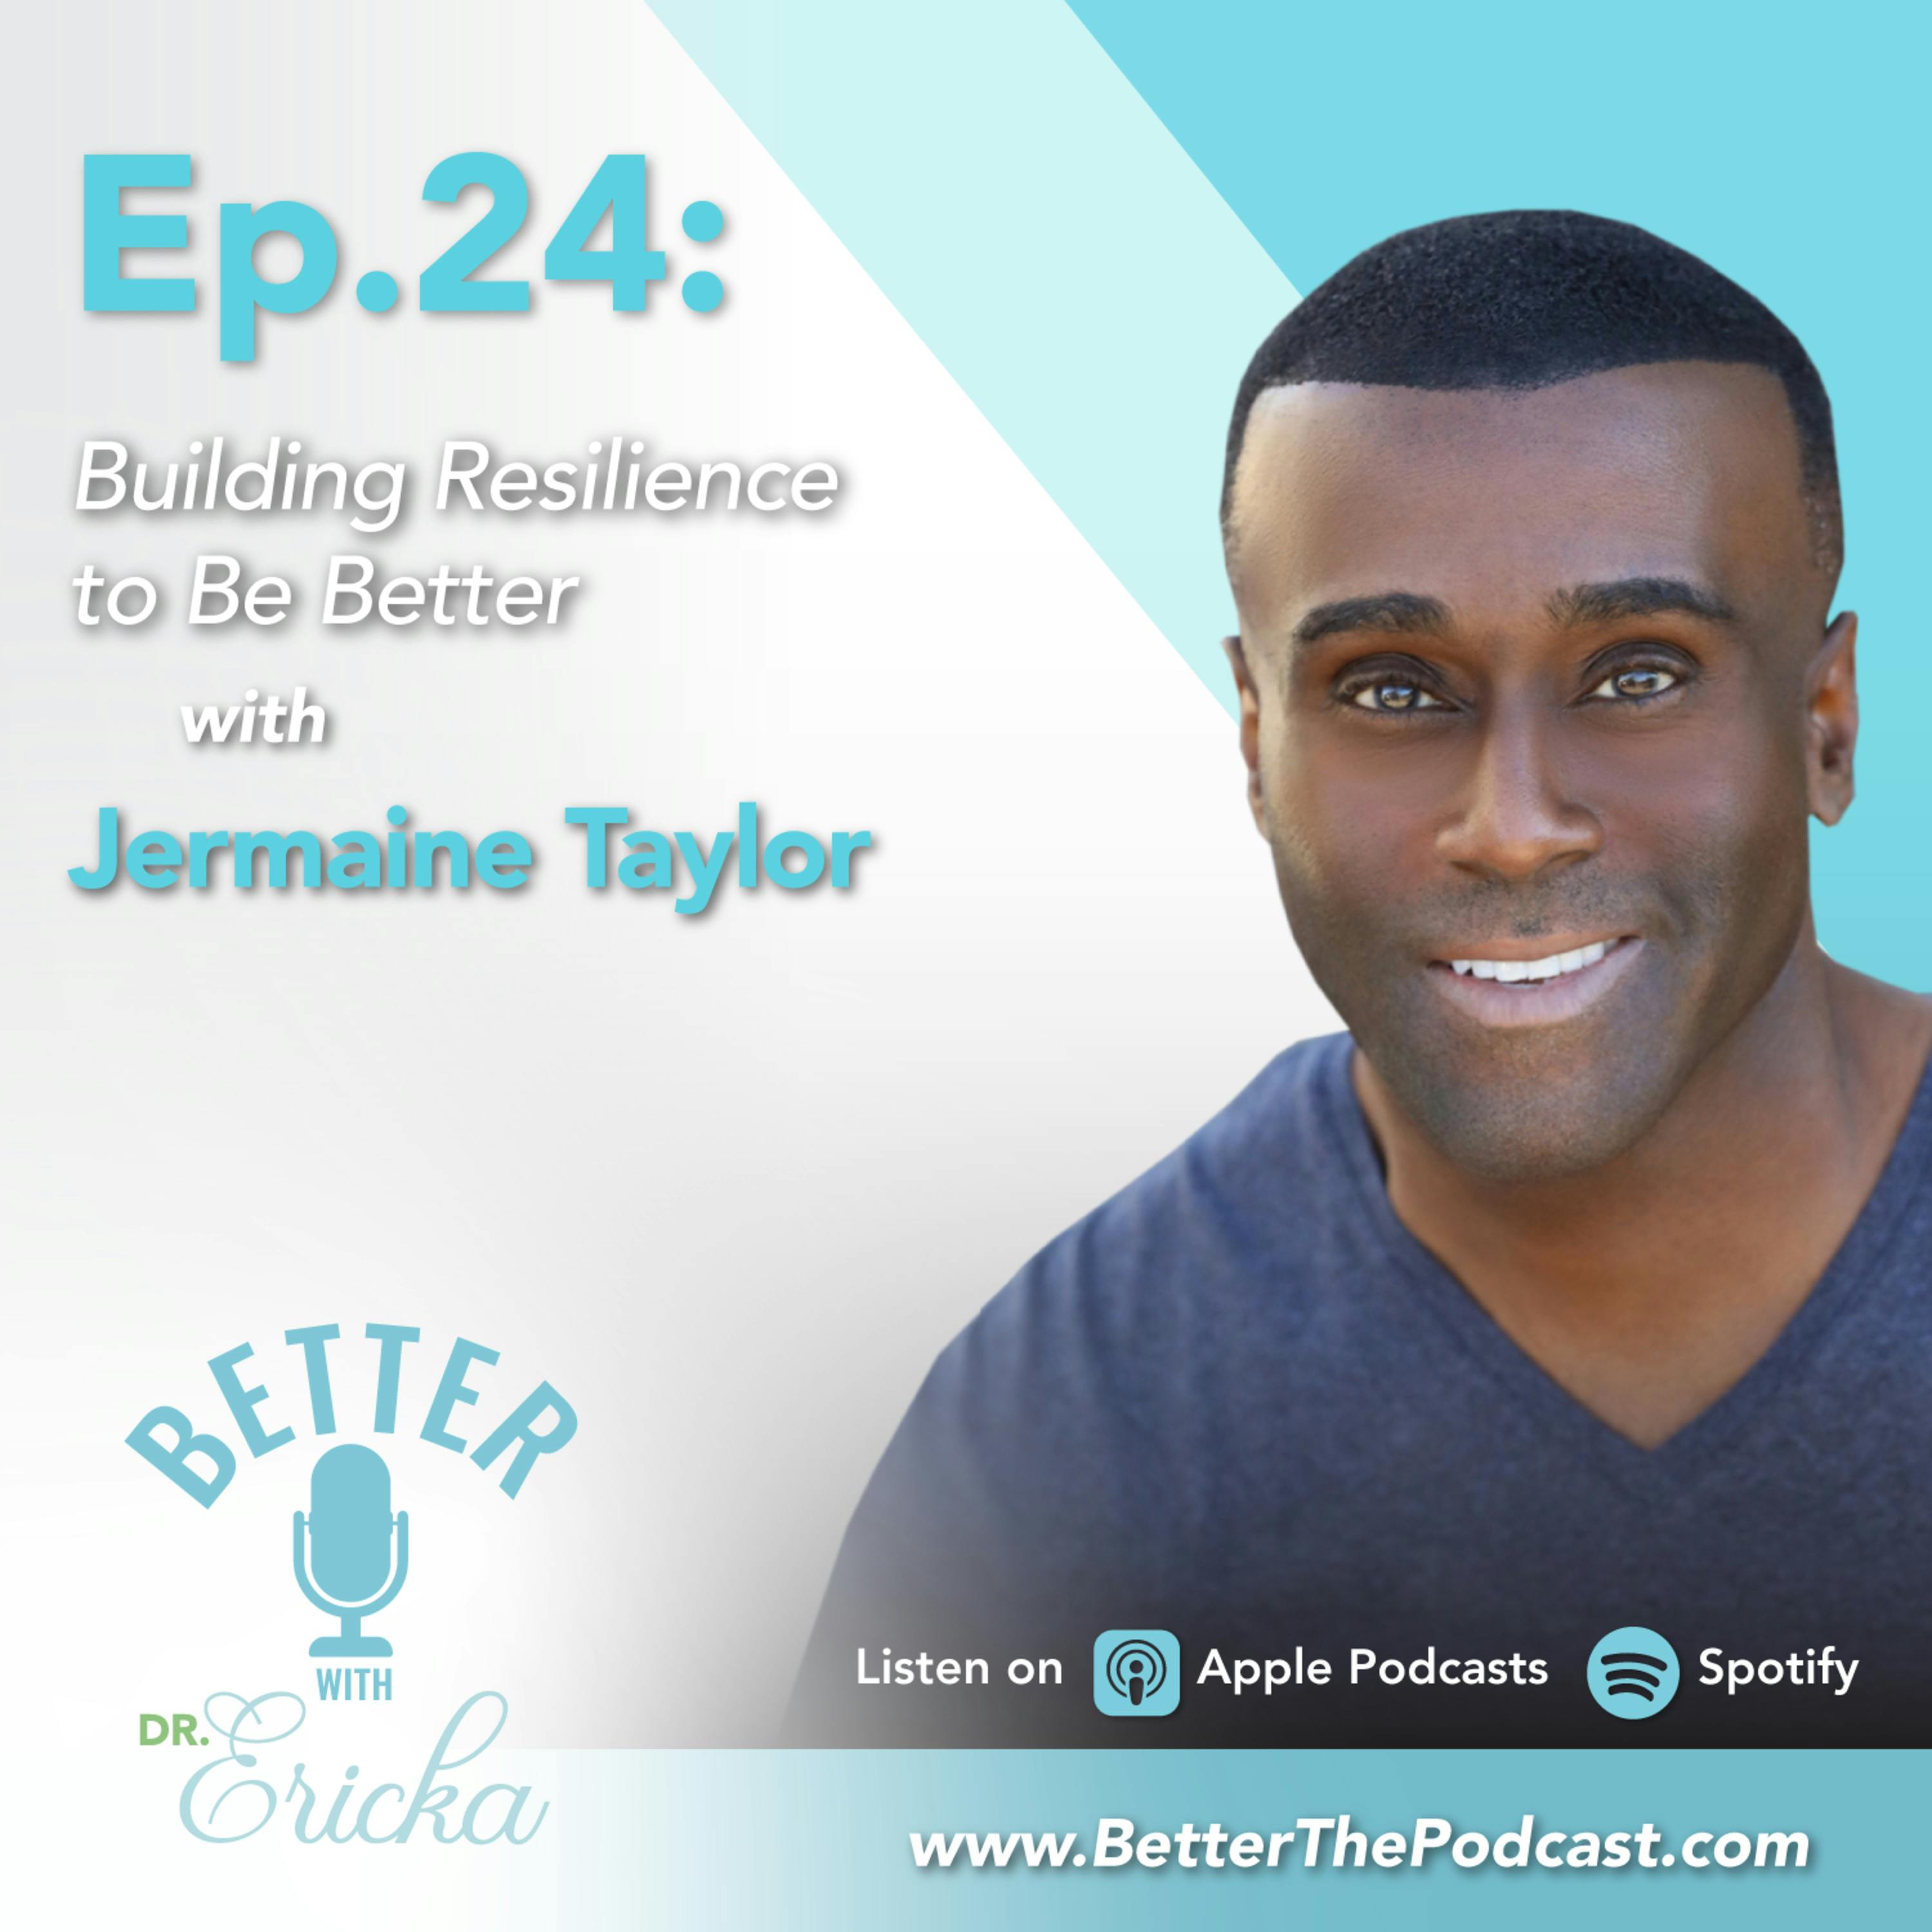 Building Resilience to Be Better with Jermaine Taylor